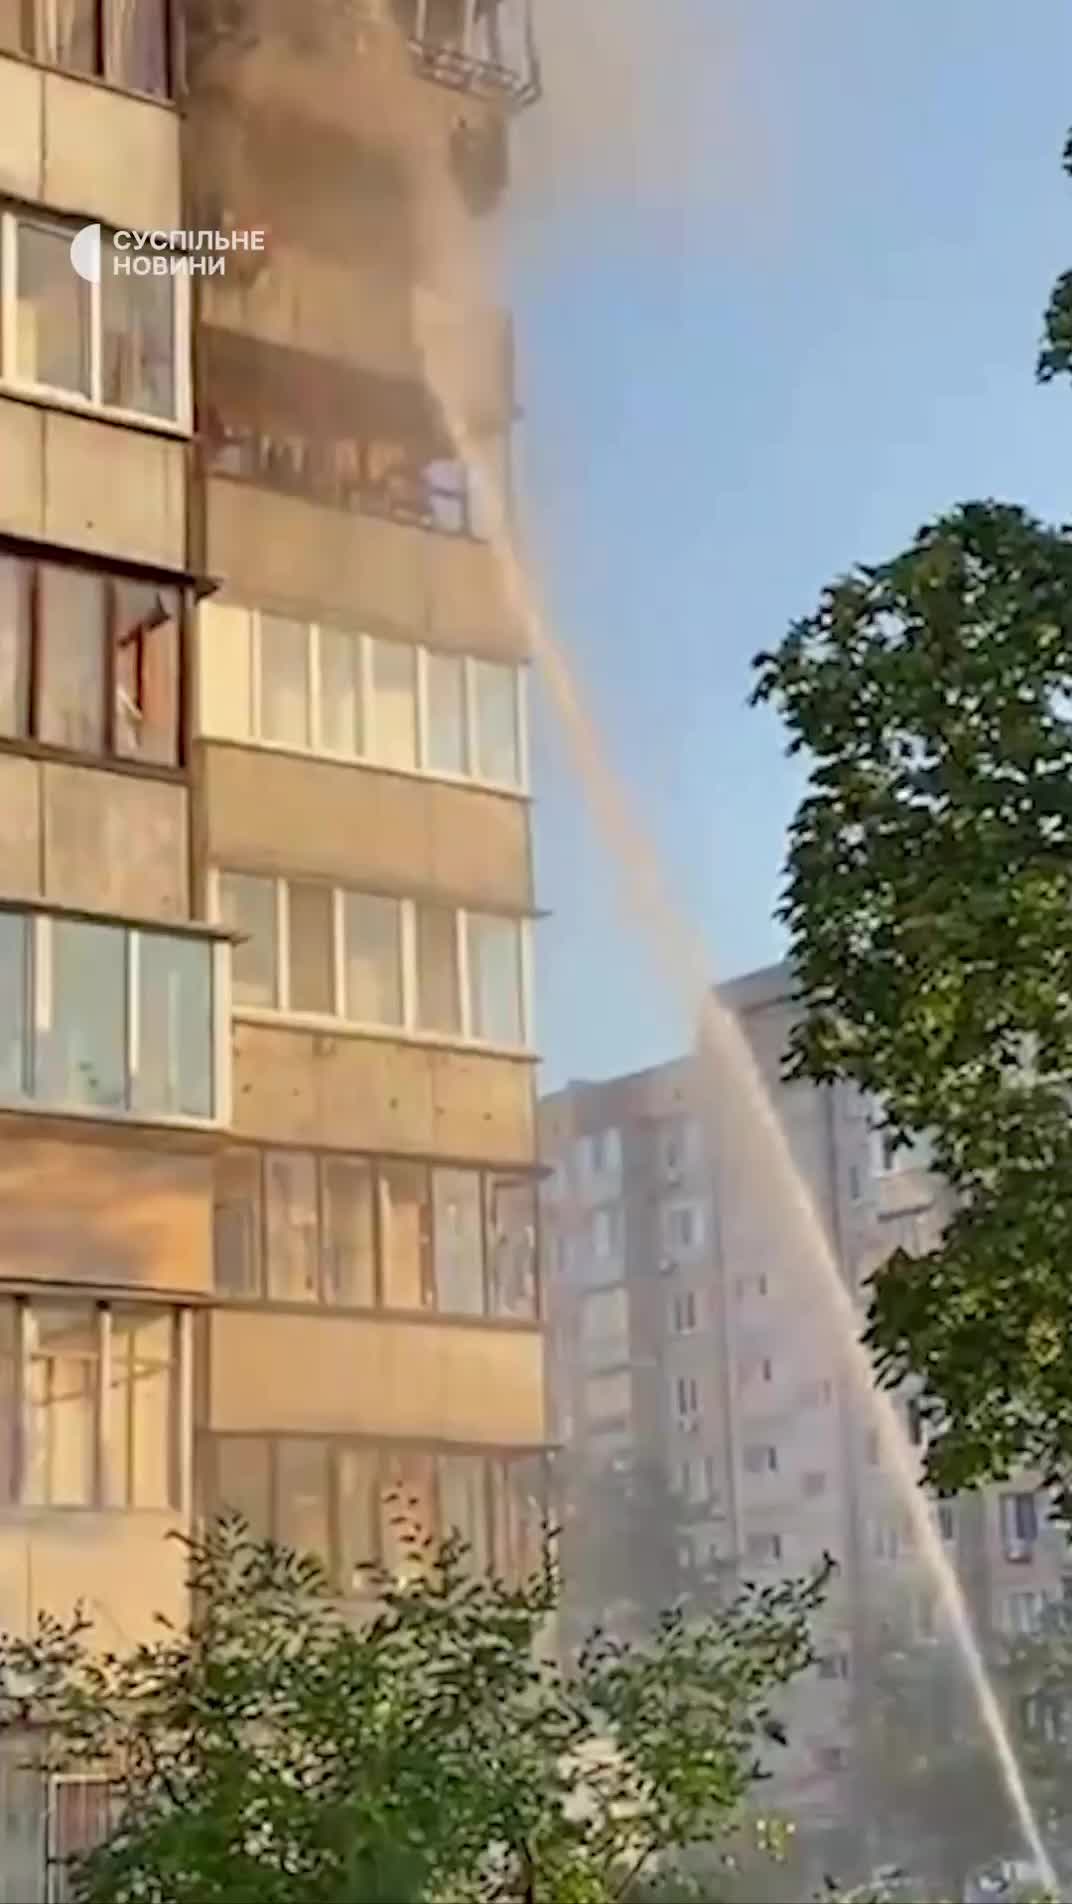 Residential building damaged as result of Russian missile strike at Obolonsky district of Kyiv